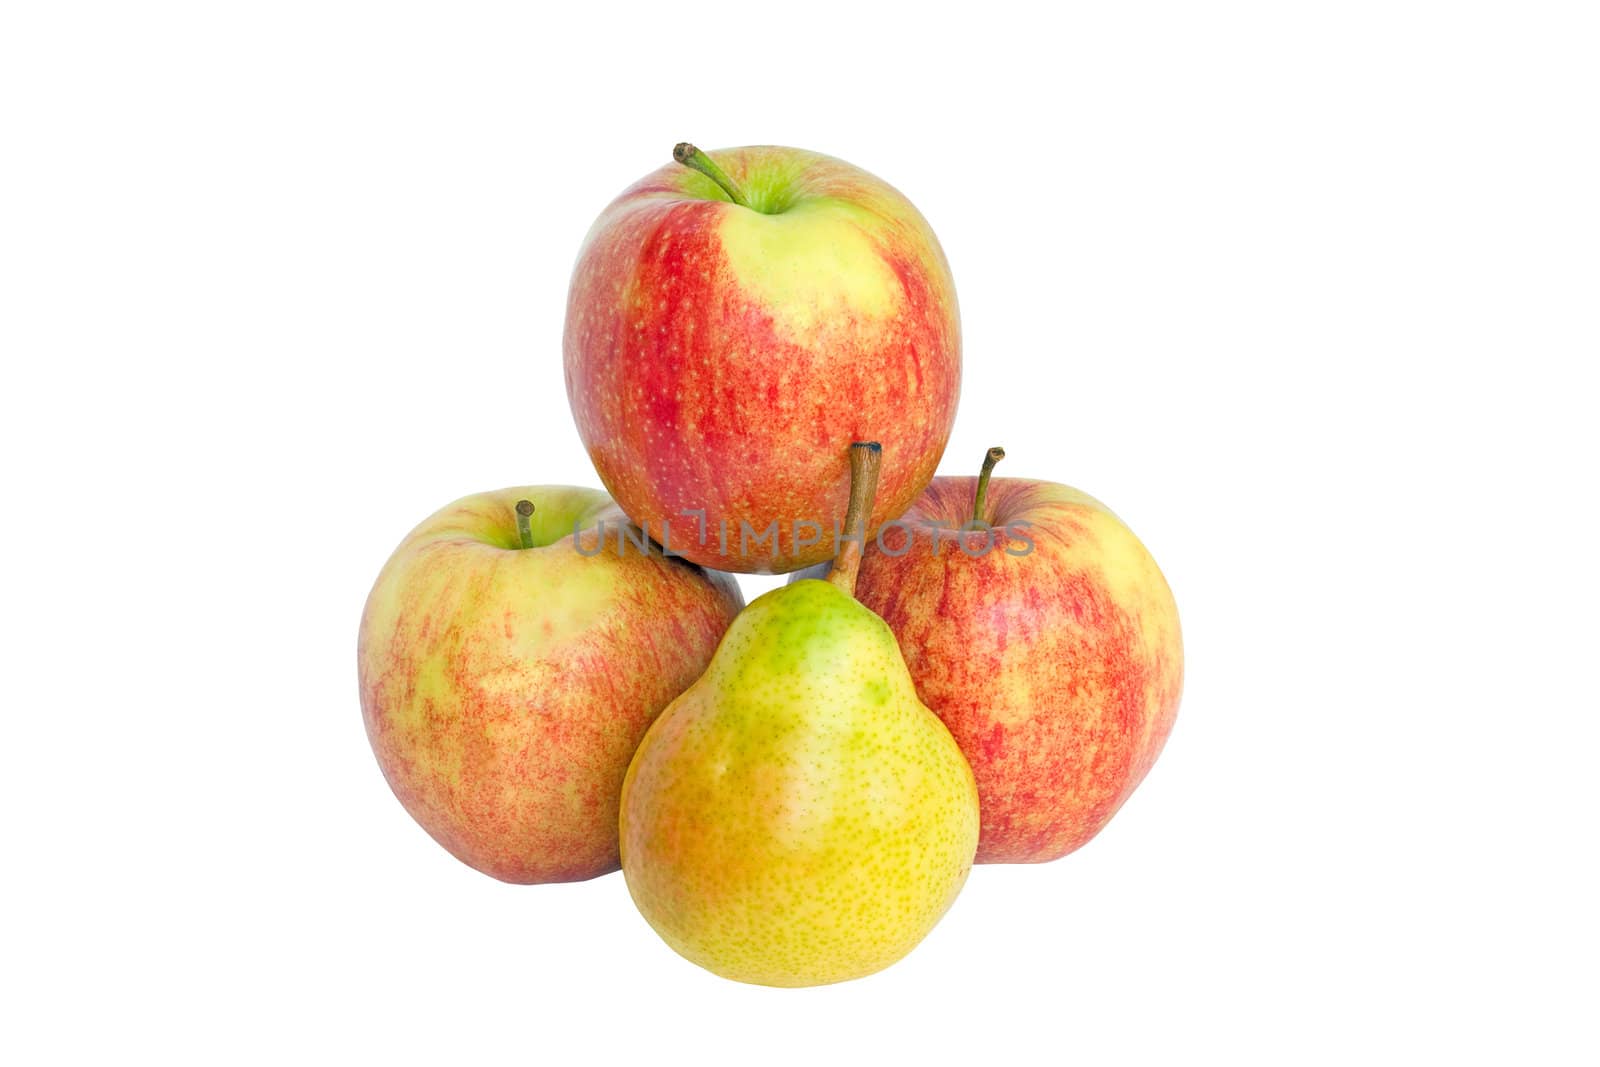 Three apples and pears, isolated on a white background.